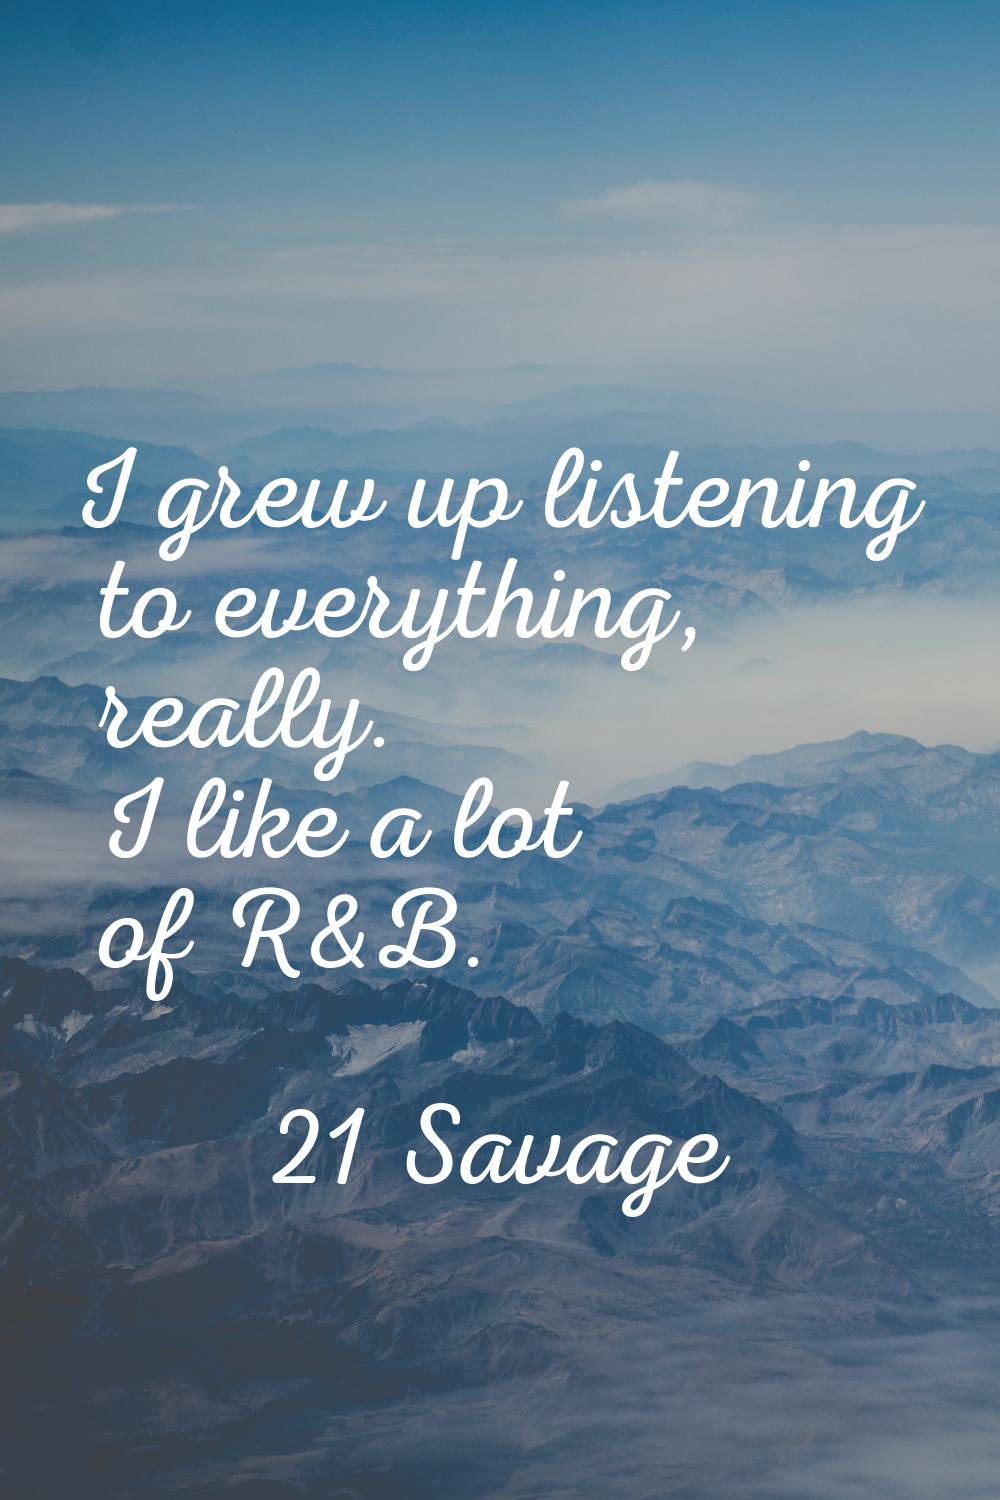 I grew up listening to everything, really. I like a lot of R&B.